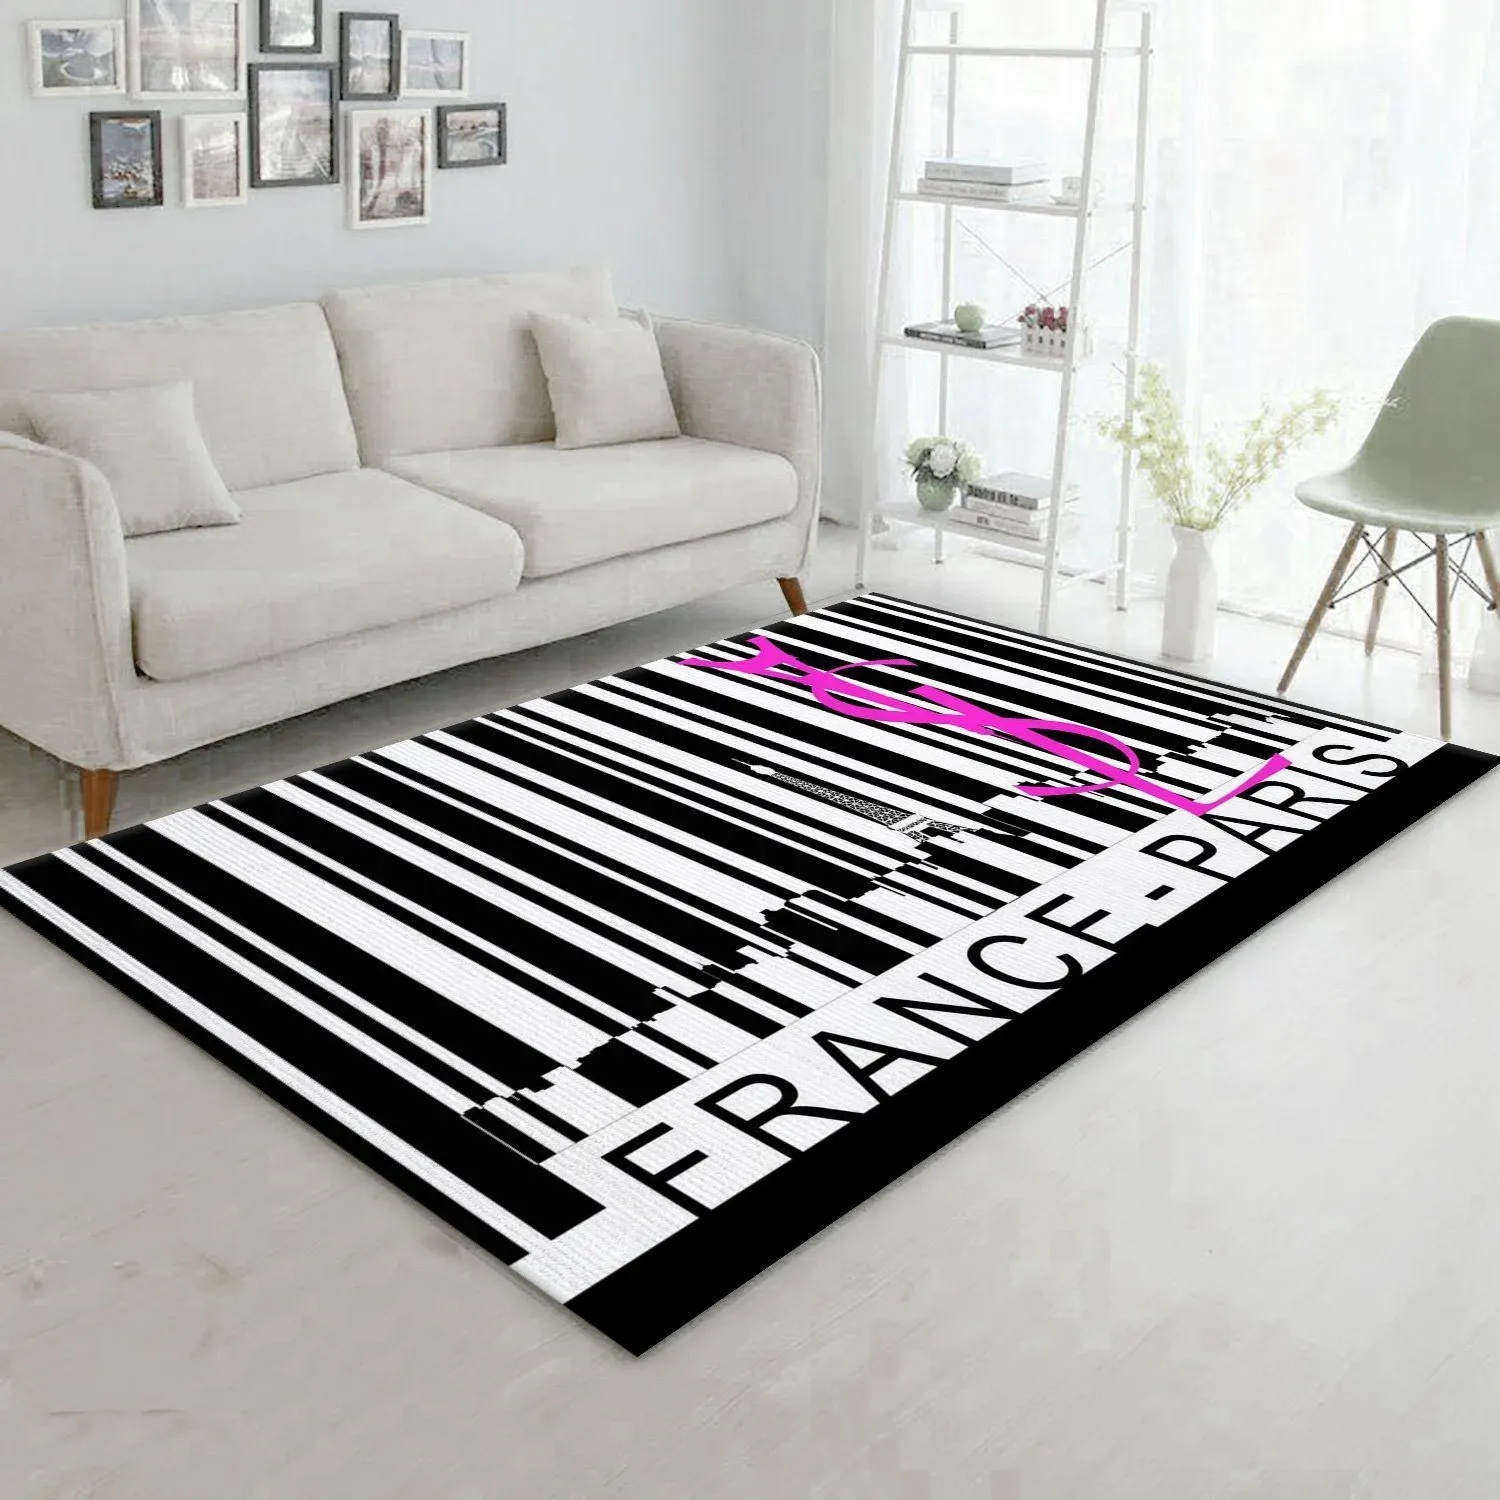 Yves Saint Laurent V10 Area Rug For Christmas Living Room Rug Family Gift US Decor - Indoor Outdoor Rugs